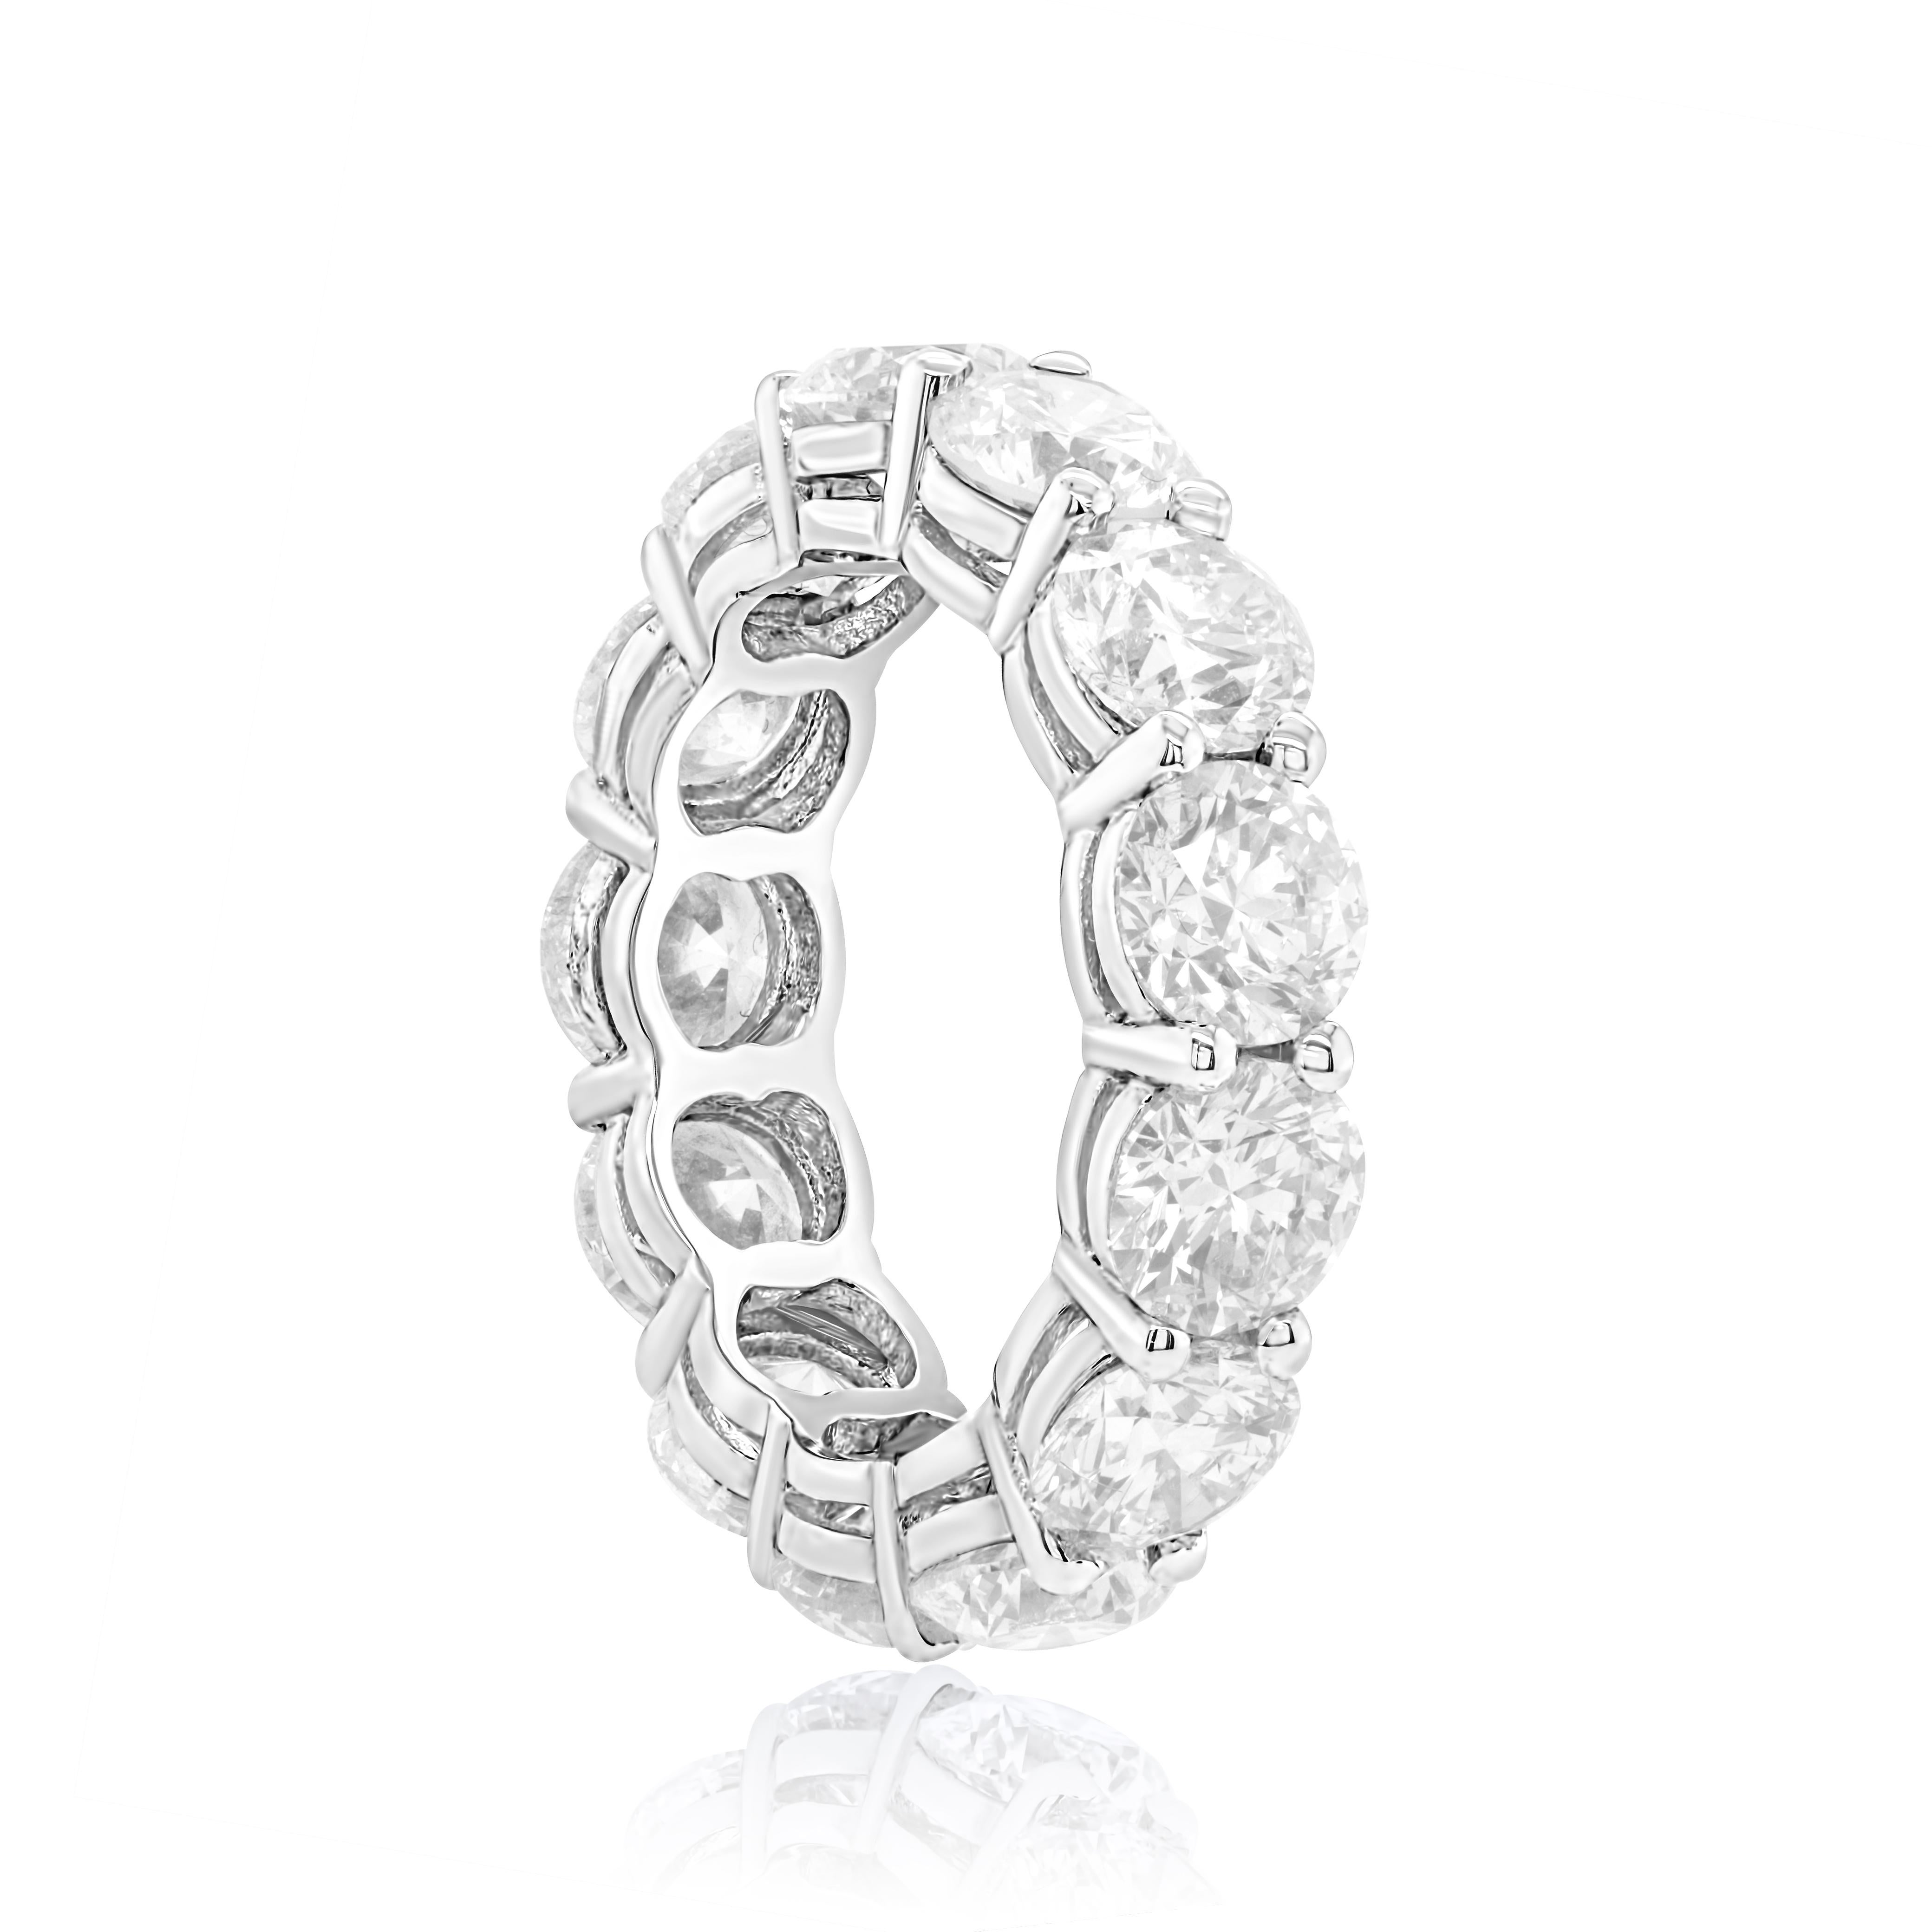 Platinum  share prong eternity band features round brilliant cut diamonds,weighing 7.05 cts total.
Diana M. is a leading supplier of top-quality fine jewelry for over 35 years.
Diana M is one-stop shop for all your jewelry shopping, carrying line of